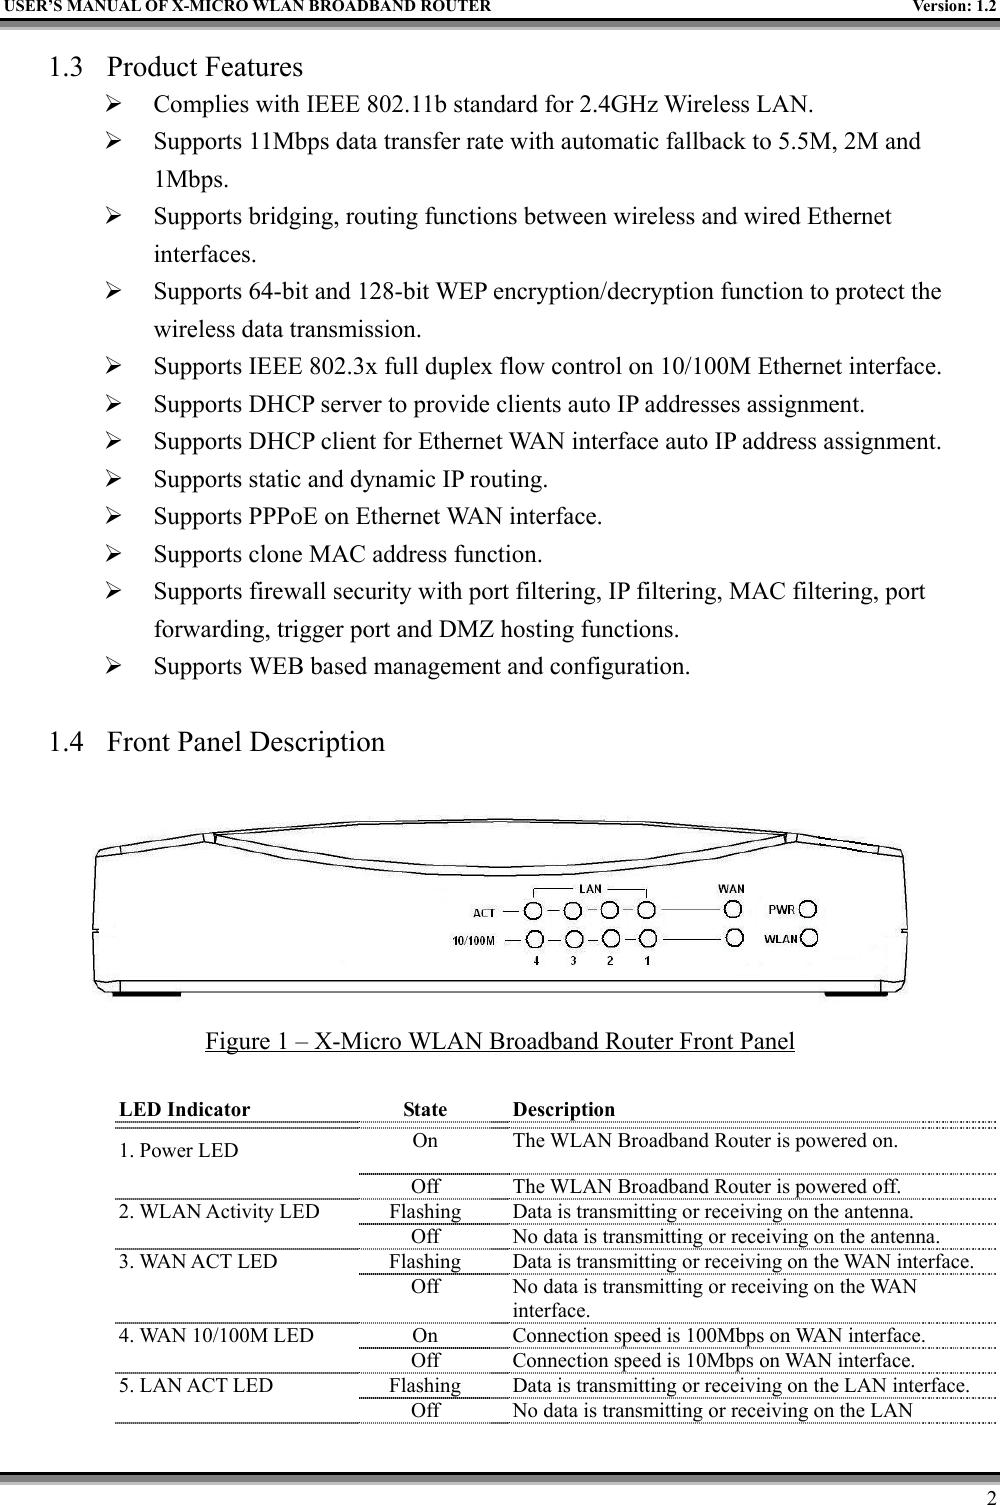 USER’S MANUAL OF X-MICRO WLAN BROADBAND ROUTER Version: 1.221.3 Product Features¾ Complies with IEEE 802.11b standard for 2.4GHz Wireless LAN.¾ Supports 11Mbps data transfer rate with automatic fallback to 5.5M, 2M and1Mbps.¾ Supports bridging, routing functions between wireless and wired Ethernetinterfaces.¾ Supports 64-bit and 128-bit WEP encryption/decryption function to protect thewireless data transmission.¾ Supports IEEE 802.3x full duplex flow control on 10/100M Ethernet interface.¾ Supports DHCP server to provide clients auto IP addresses assignment.¾ Supports DHCP client for Ethernet WAN interface auto IP address assignment.¾ Supports static and dynamic IP routing.¾ Supports PPPoE on Ethernet WAN interface.¾ Supports clone MAC address function.¾ Supports firewall security with port filtering, IP filtering, MAC filtering, portforwarding, trigger port and DMZ hosting functions.¾ Supports WEB based management and configuration.1.4 Front Panel DescriptionFigure 1 – X-Micro WLAN Broadband Router Front PanelLED Indicator State Description1. Power LED On The WLAN Broadband Router is powered on.Off The WLAN Broadband Router is powered off.2. WLAN Activity LED Flashing Data is transmitting or receiving on the antenna.Off No data is transmitting or receiving on the antenna.3. WAN ACT LED Flashing Data is transmitting or receiving on the WAN interface.Off No data is transmitting or receiving on the WANinterface.4. WAN 10/100M LED On Connection speed is 100Mbps on WAN interface.Off Connection speed is 10Mbps on WAN interface.5. LAN ACT LED Flashing Data is transmitting or receiving on the LAN interface.Off No data is transmitting or receiving on the LAN